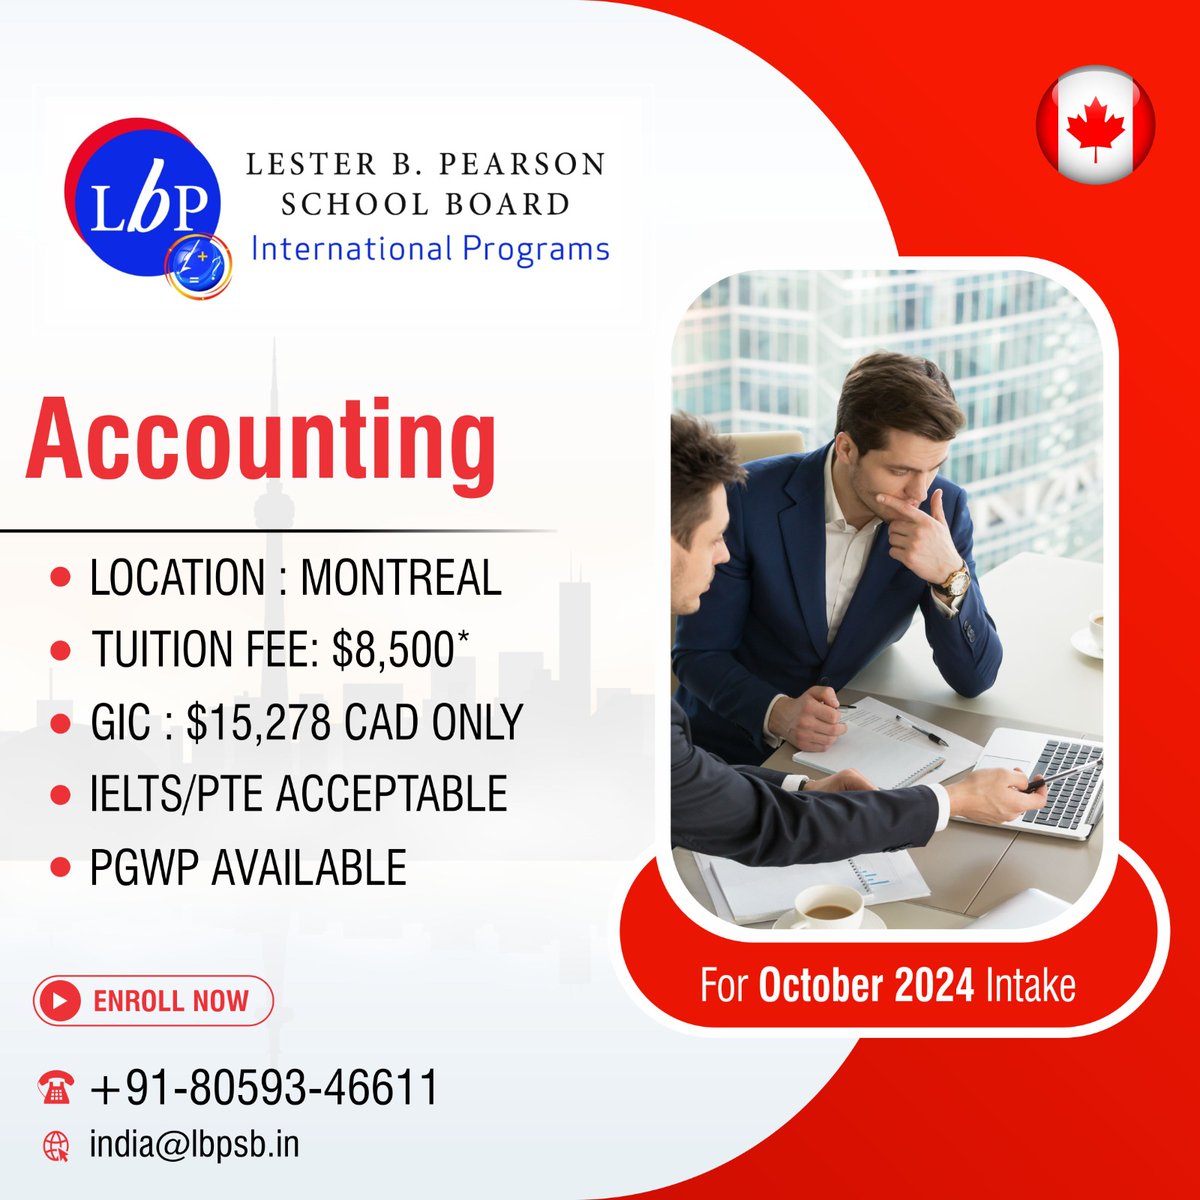 ✅ Lester B Pearson School Board

🔸PROGRAM: ACCOUNTING
🔸LOCATION: MONTREAL
🔸TUITION FEE: $8500*
🔸GIC: $15278 CAD Only
🔸IELTS/PTE ACCEPTABLE
🔸PGWP AVAILABLE

𝐑𝐄𝐒𝐄𝐑𝐕𝐄 𝐘𝐎𝐔𝐑 𝐒𝐄𝐀𝐓𝐒 𝐍𝐎𝐖👇

❗️𝐀𝐏𝐏𝐋𝐘 𝐓𝐎𝐃𝐀𝐘❗️